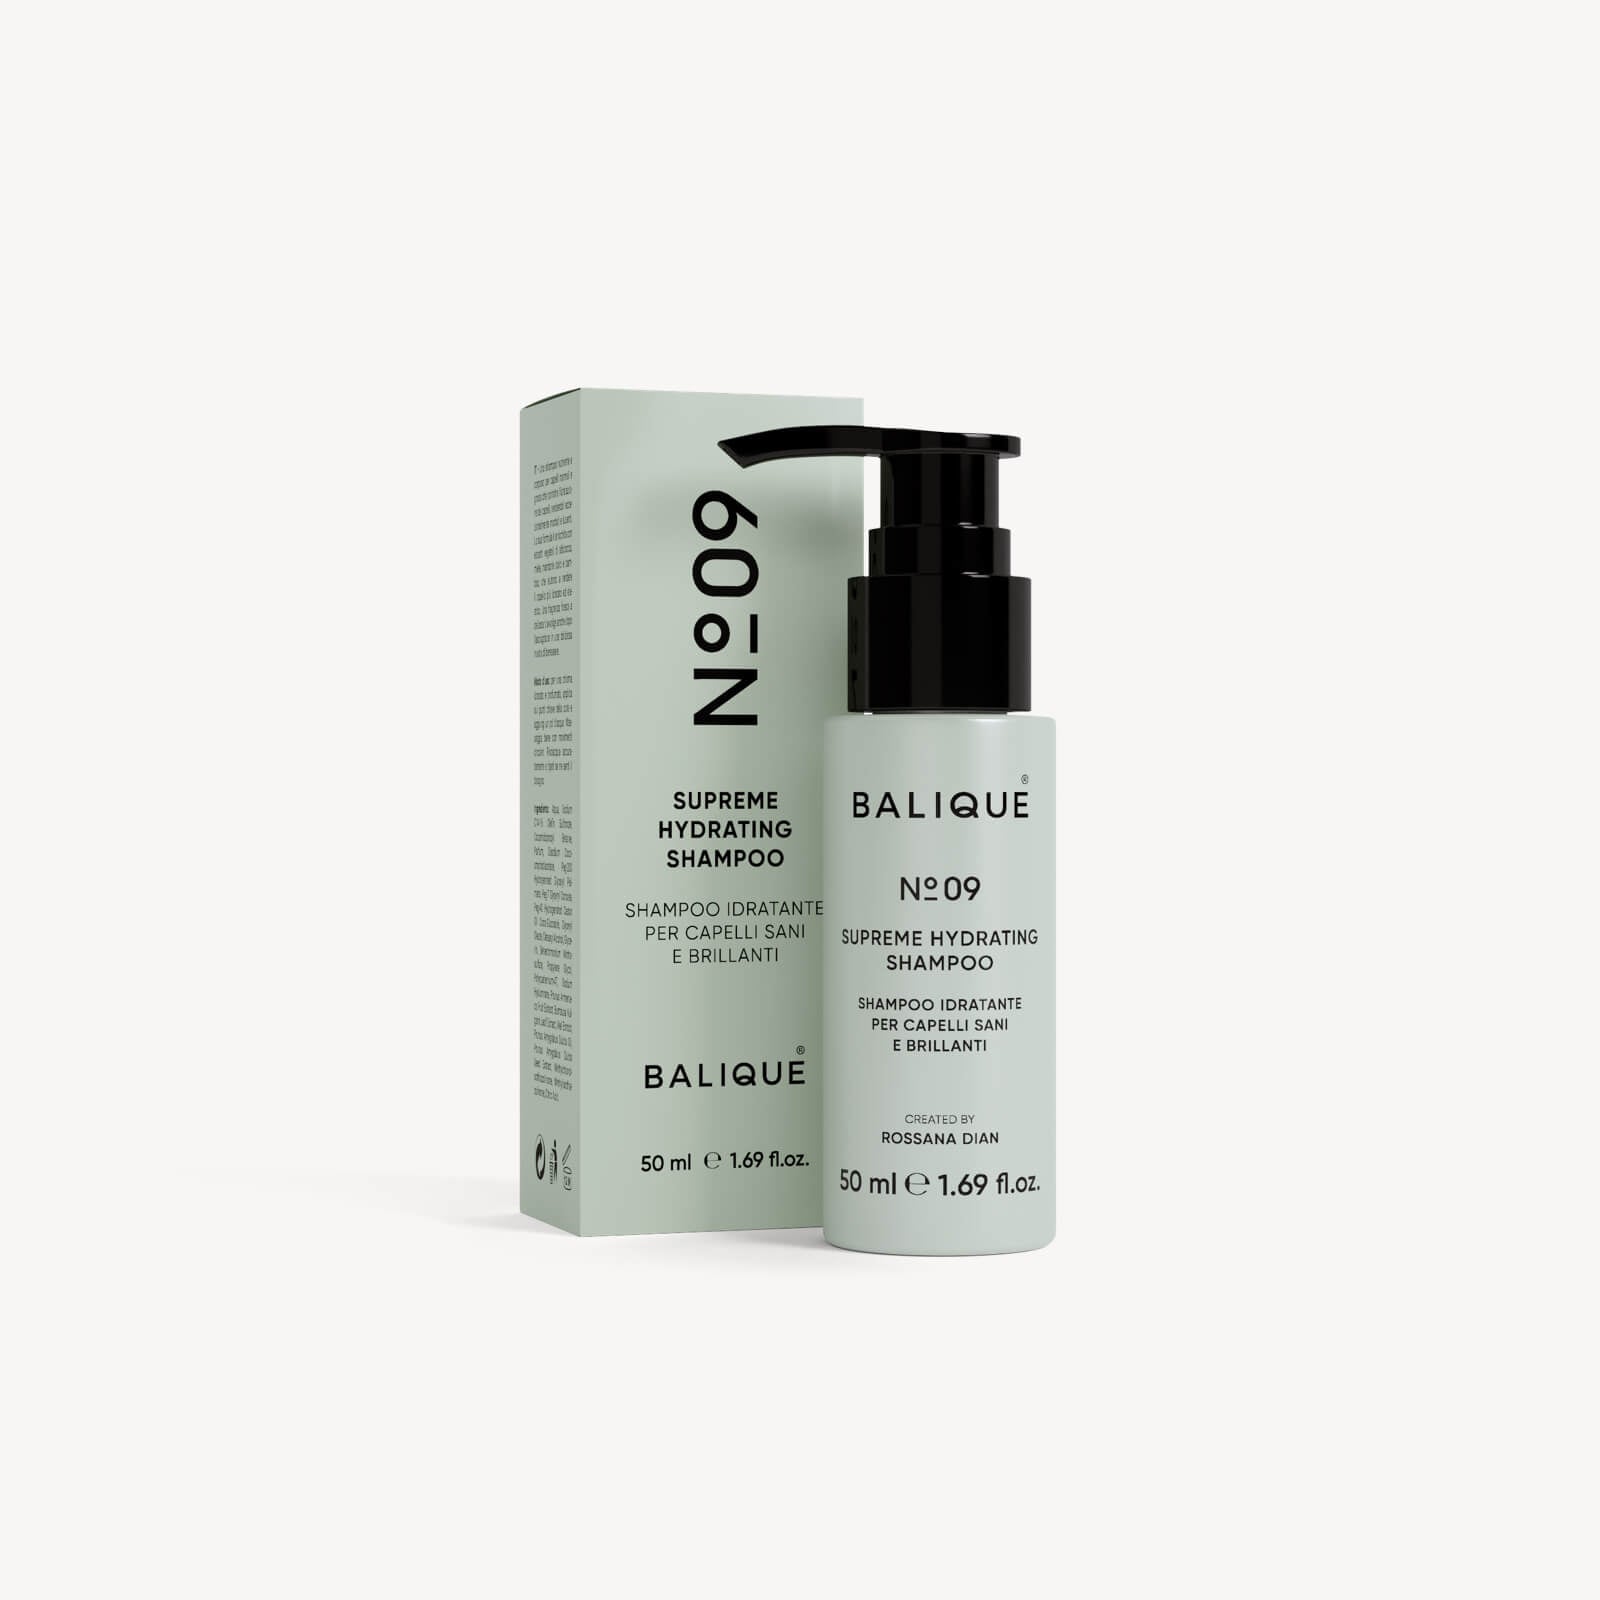 BOX 04 - TRAVEL SIZE - Treated curly hair - Complete treatment 